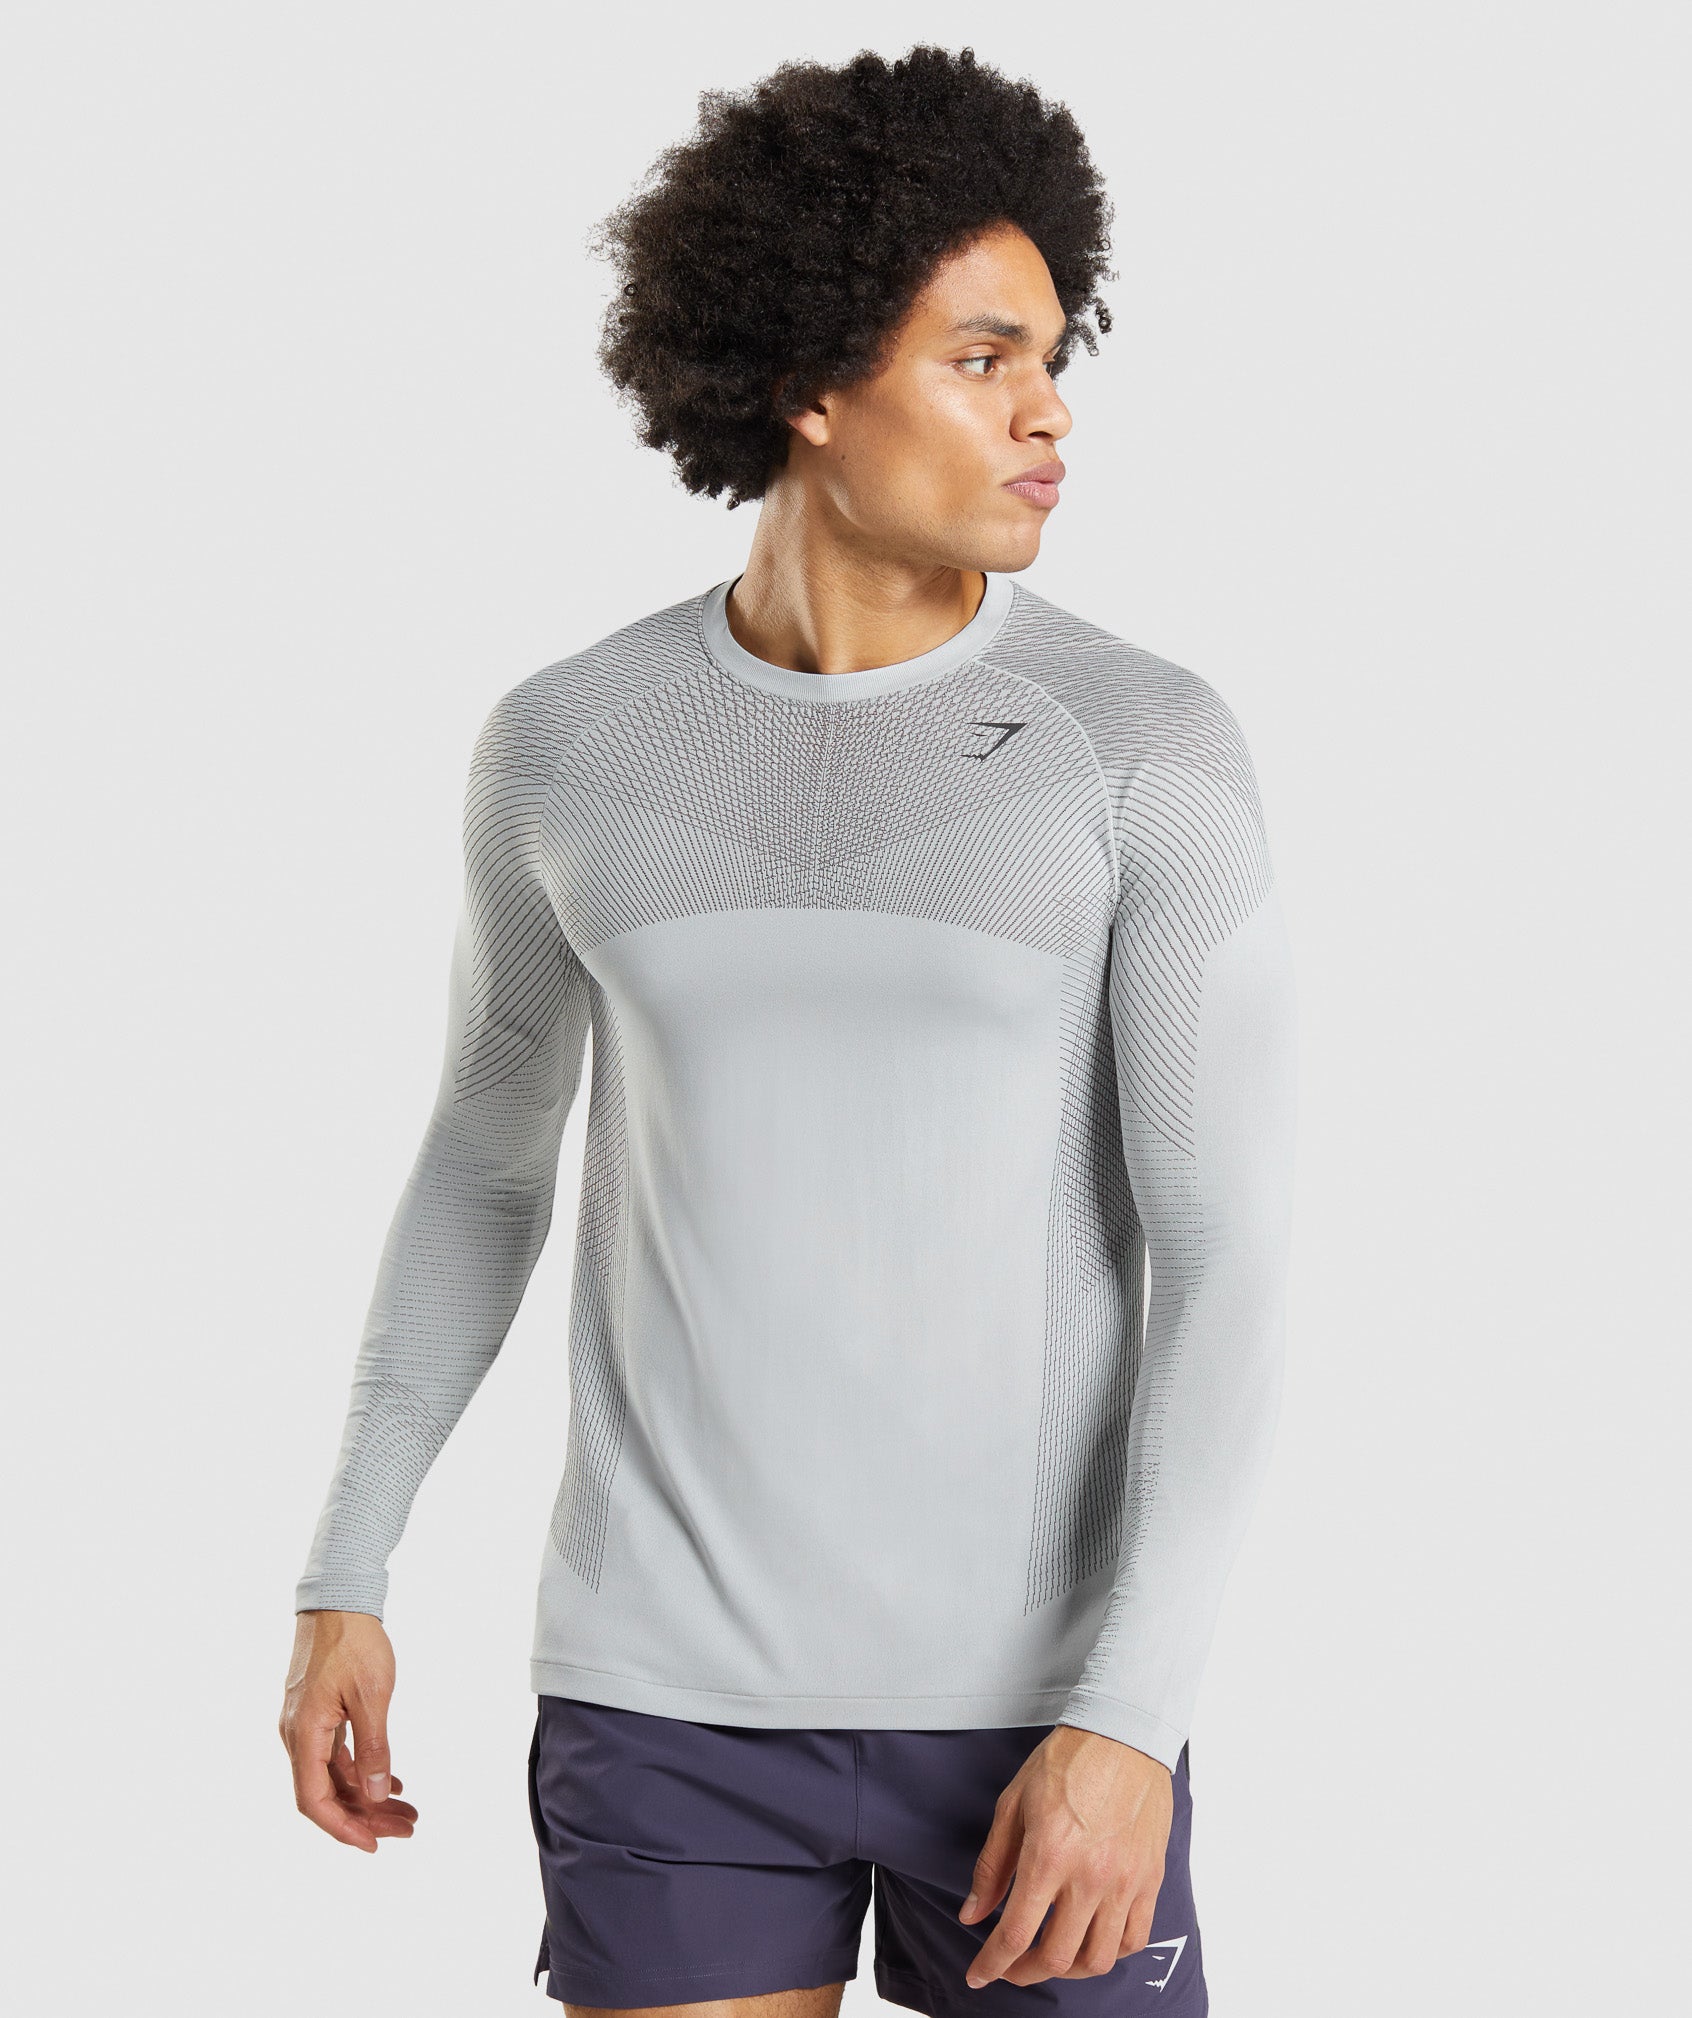 Gymshark Seamless Airflow Gray & Pink Compression Athletic Shirt